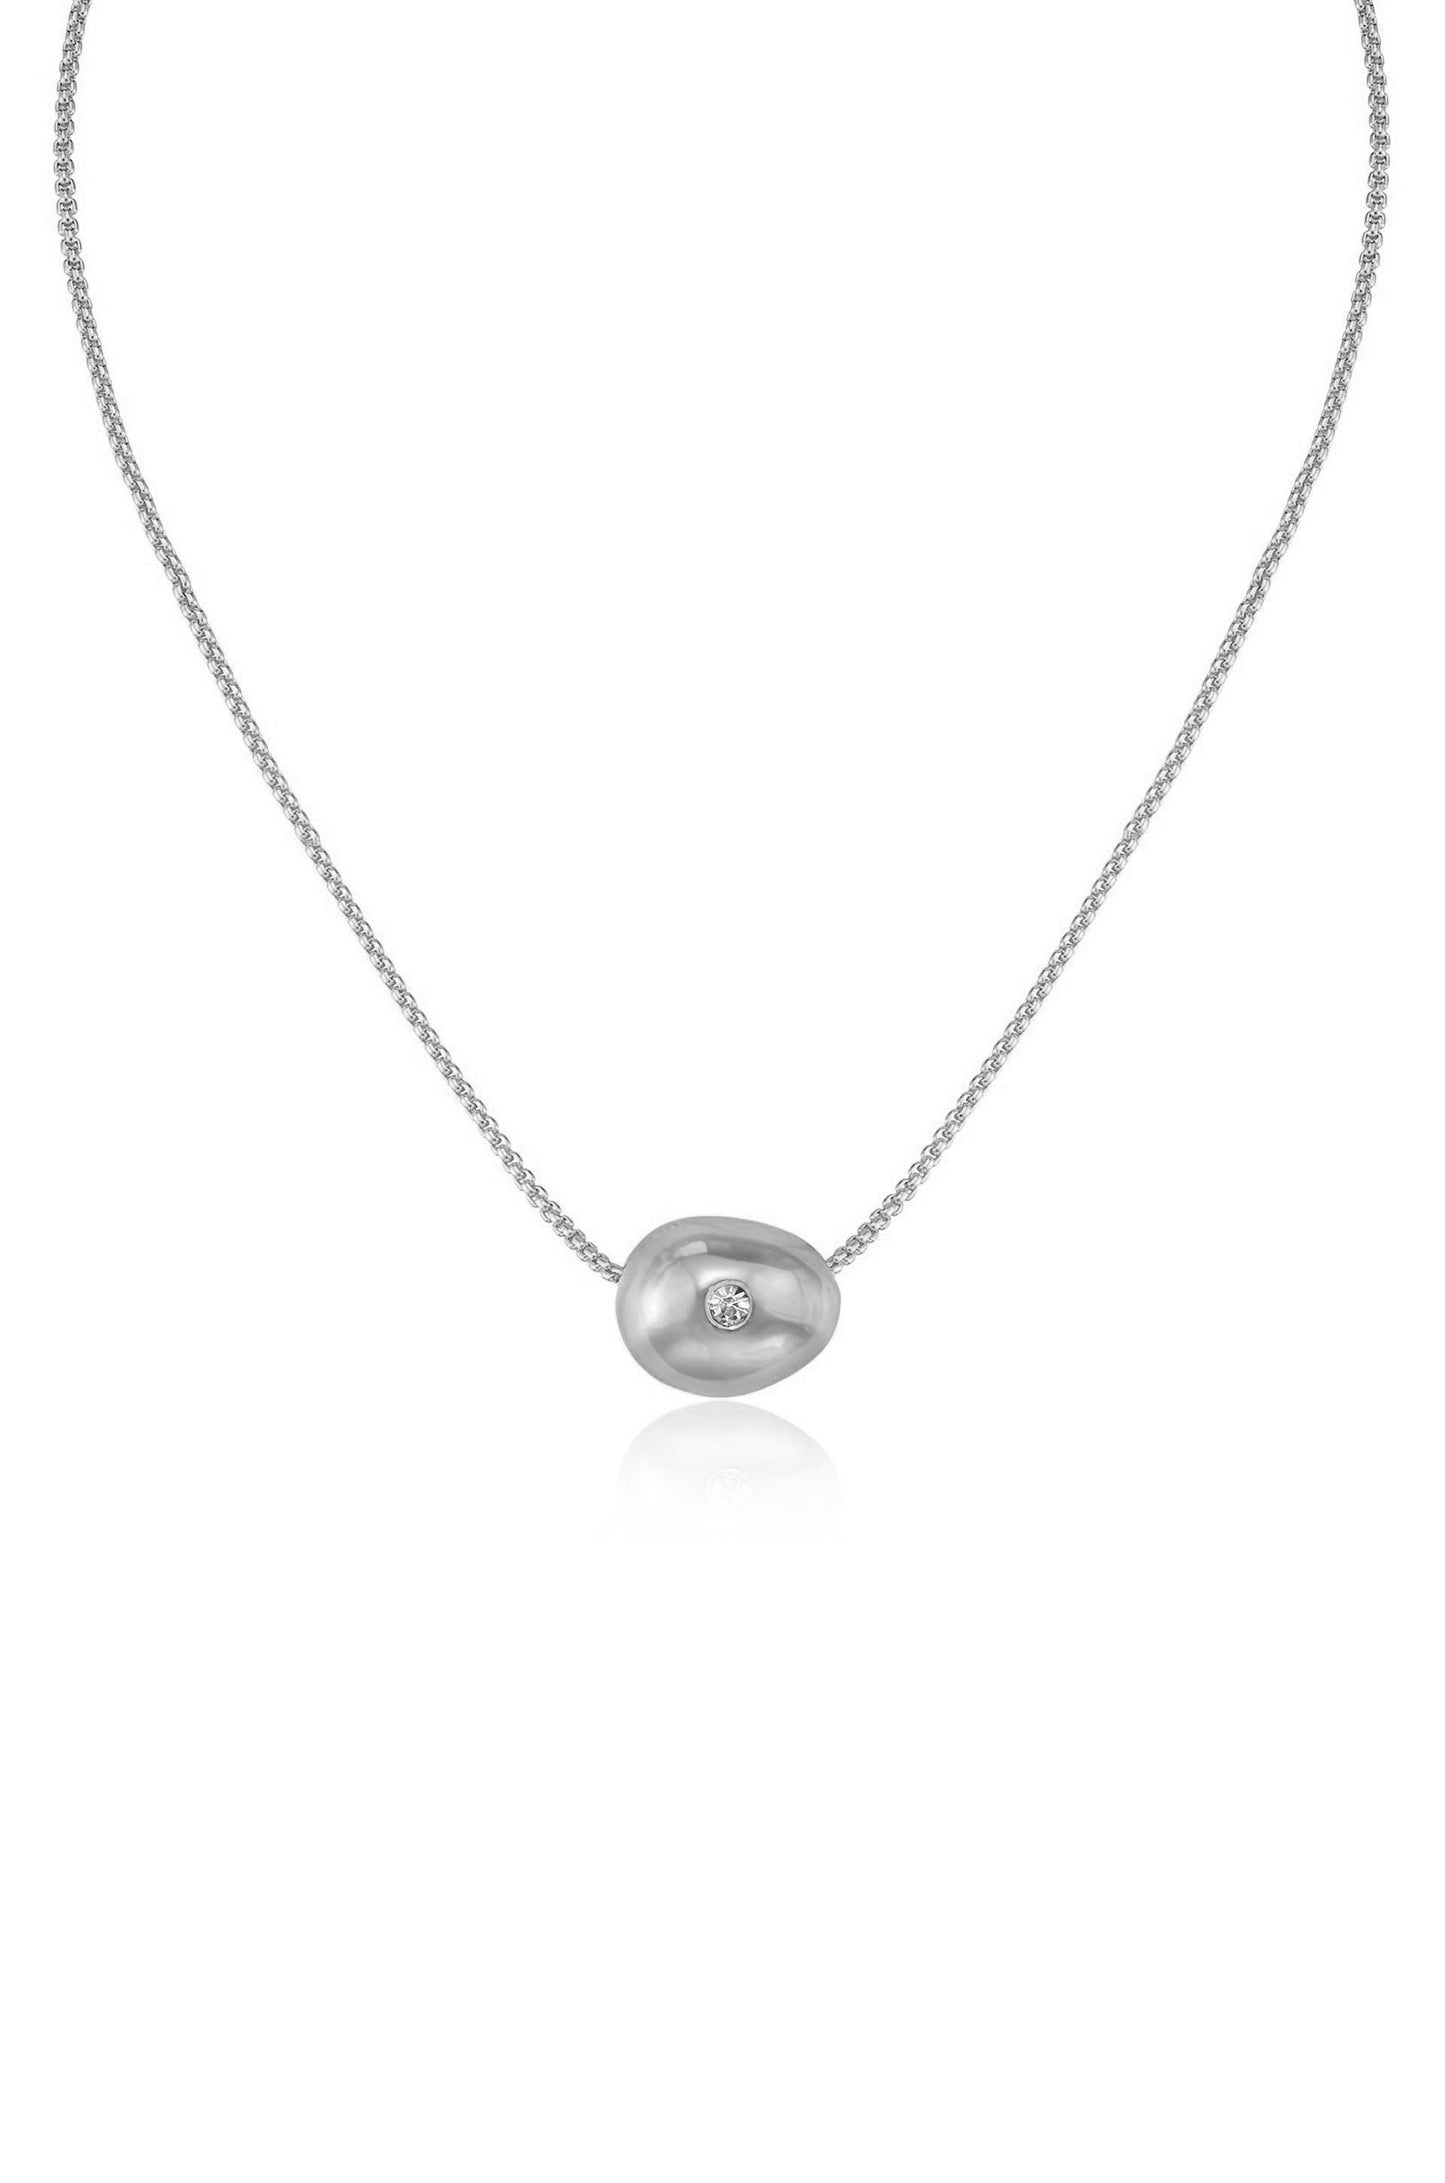 Crystal Dot Pebble Pendant Necklace in rhodium close